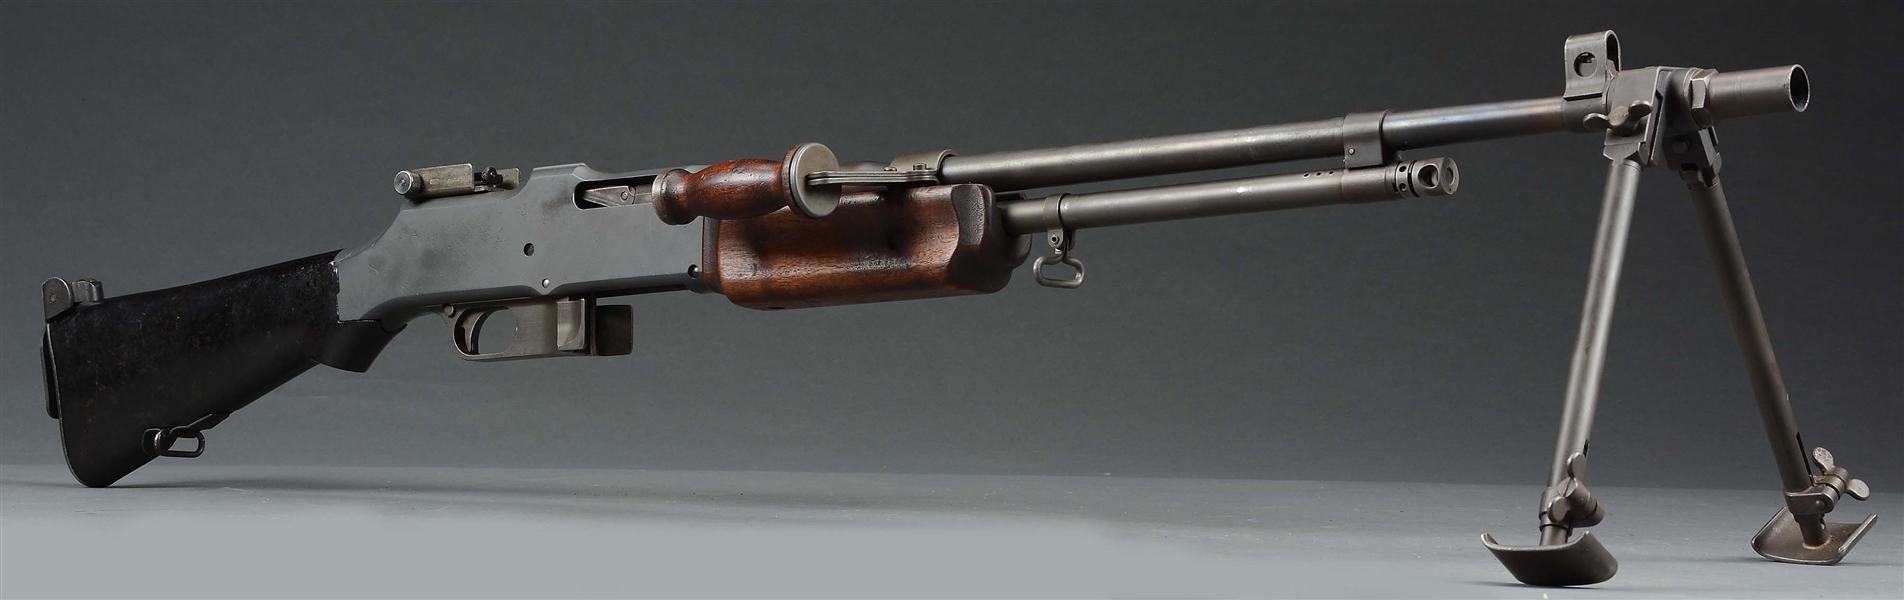 (N) HIGH CONDITION MARLIN ROCKWELL 1918 BROWNING AUTOMATIC RIFLE AS RETROFITTED TO 1918 A2 CONFIGURATION (CURIO & RELIC)